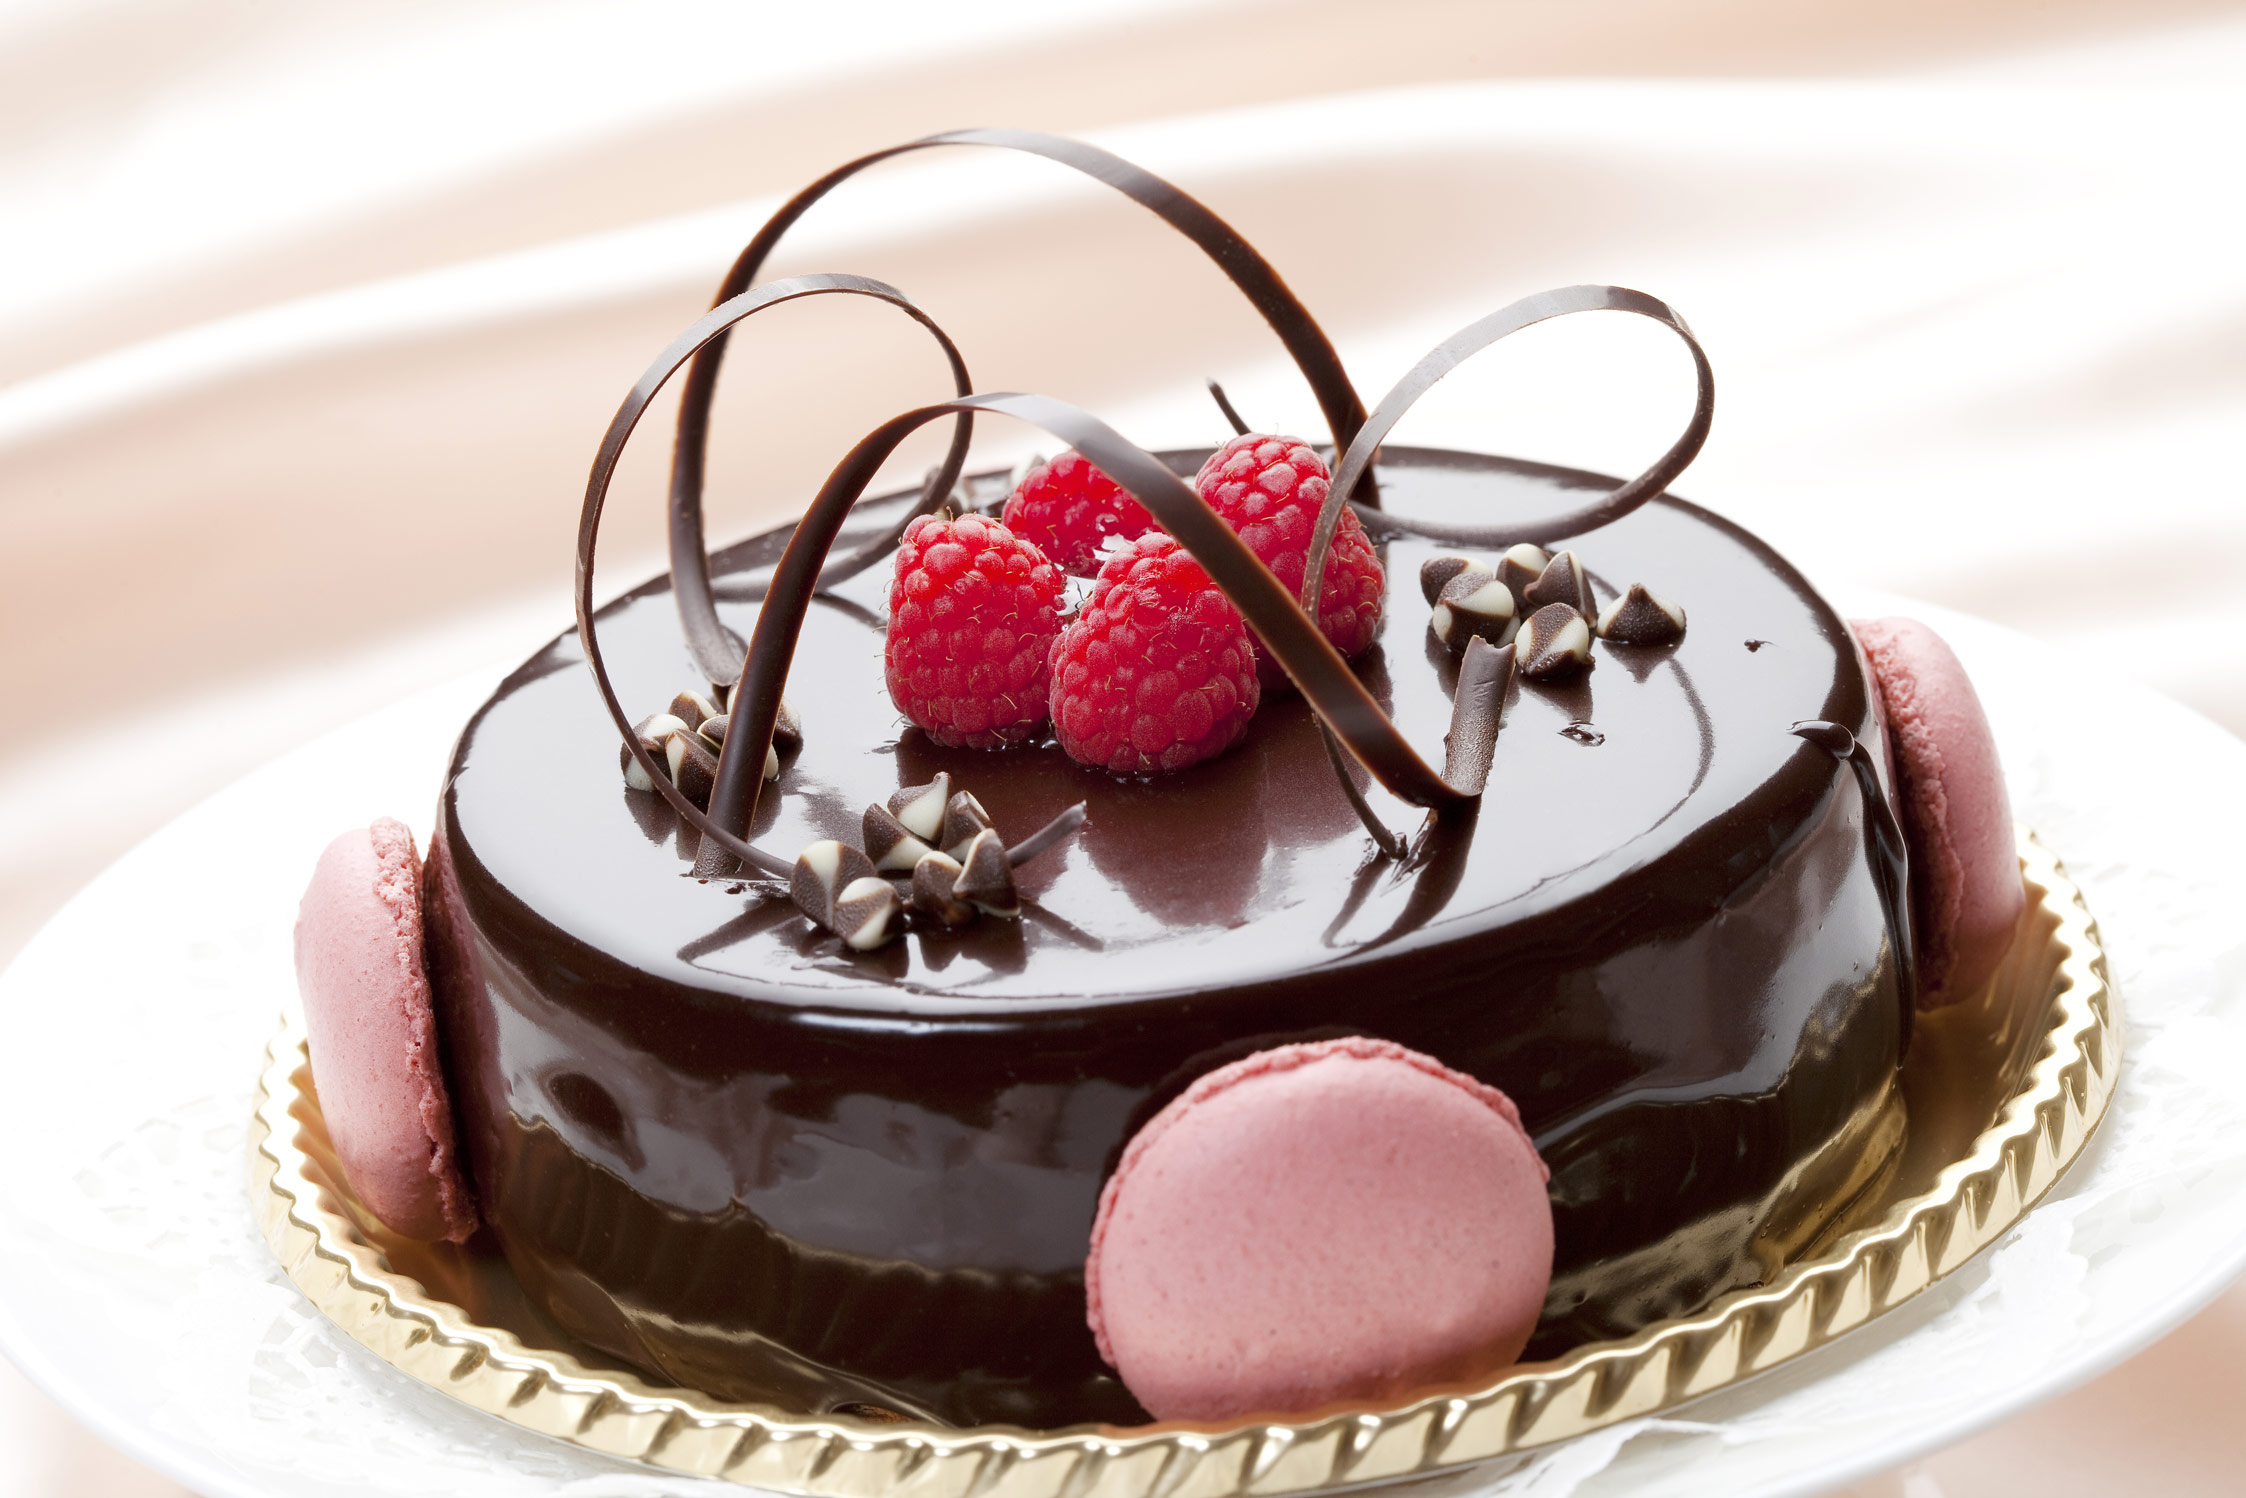 Order Cake Online And Feed Your Sweet Tooth!